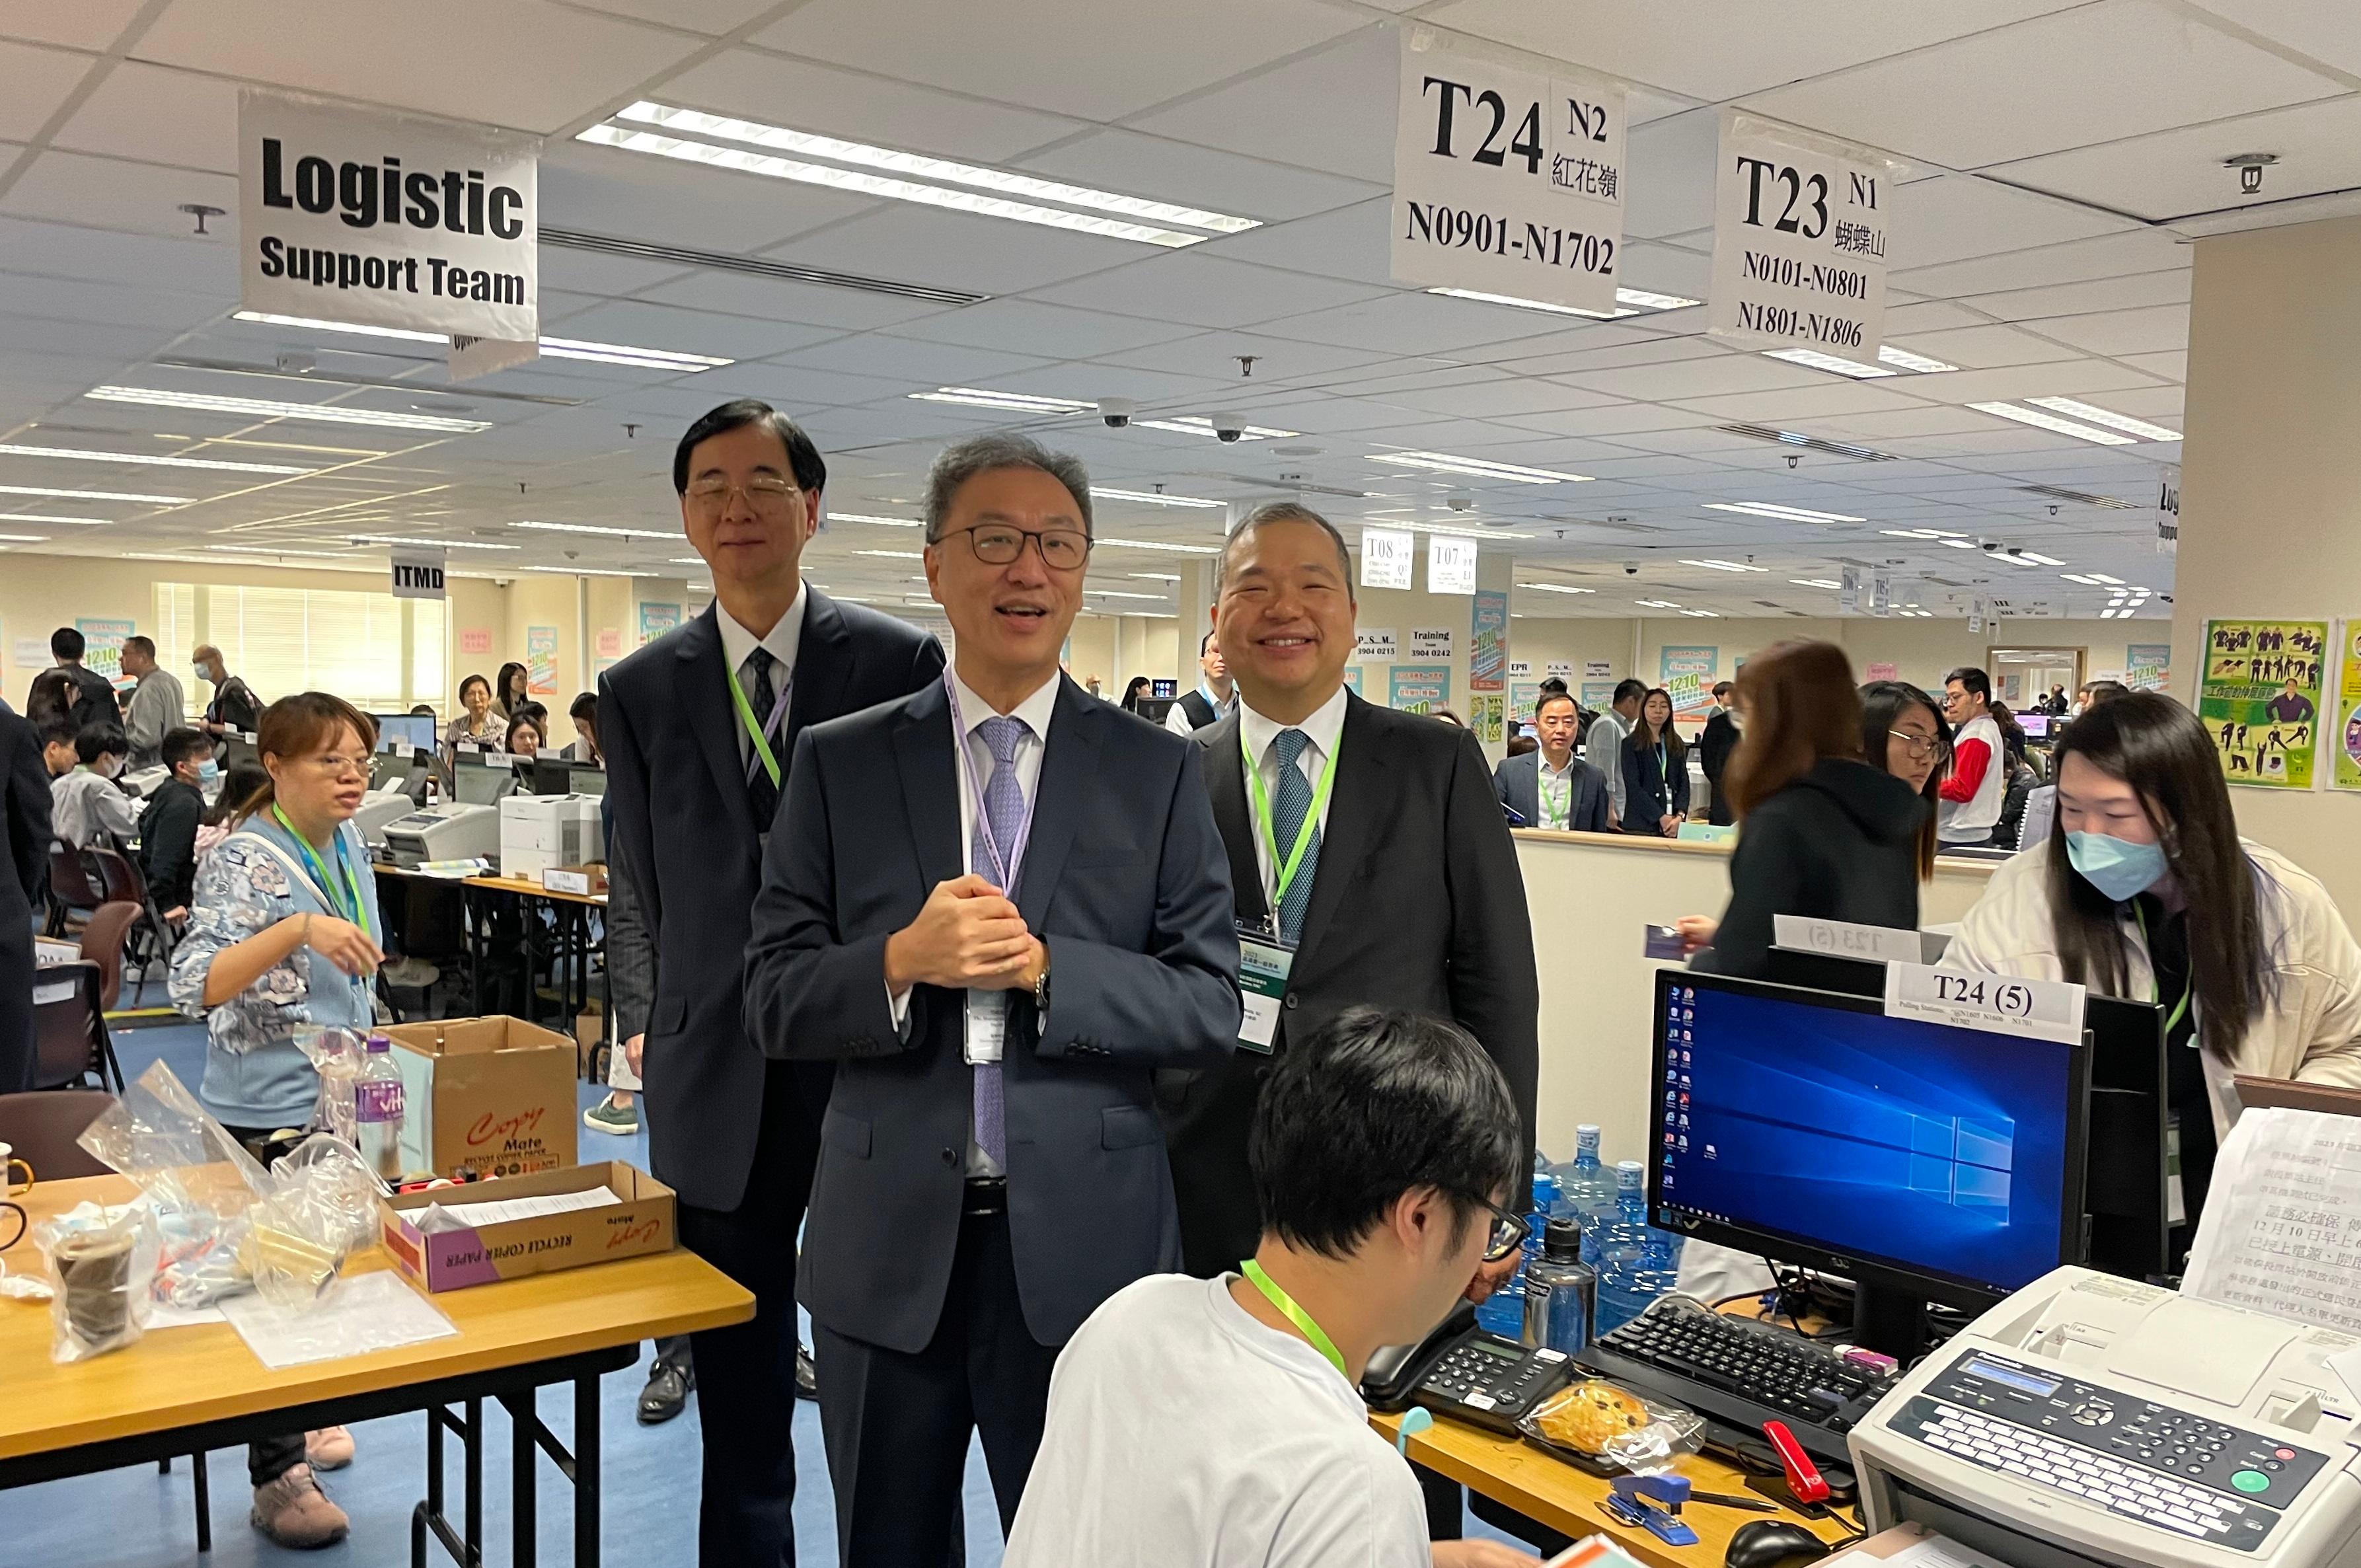 The Chairman of the Electoral Affairs Commission (EAC), Mr Justice David Lok (centre), visits the Central Command Centre and Statistical Information Centre of the 2023 District Council Ordinary Election at the Kowloonbay International Trade and Exhibition Centre this morning (December 10) and gives support to the electoral staff. Also present are EAC members Professor Daniel Shek (left) and Mr Bernard Man, SC (right).